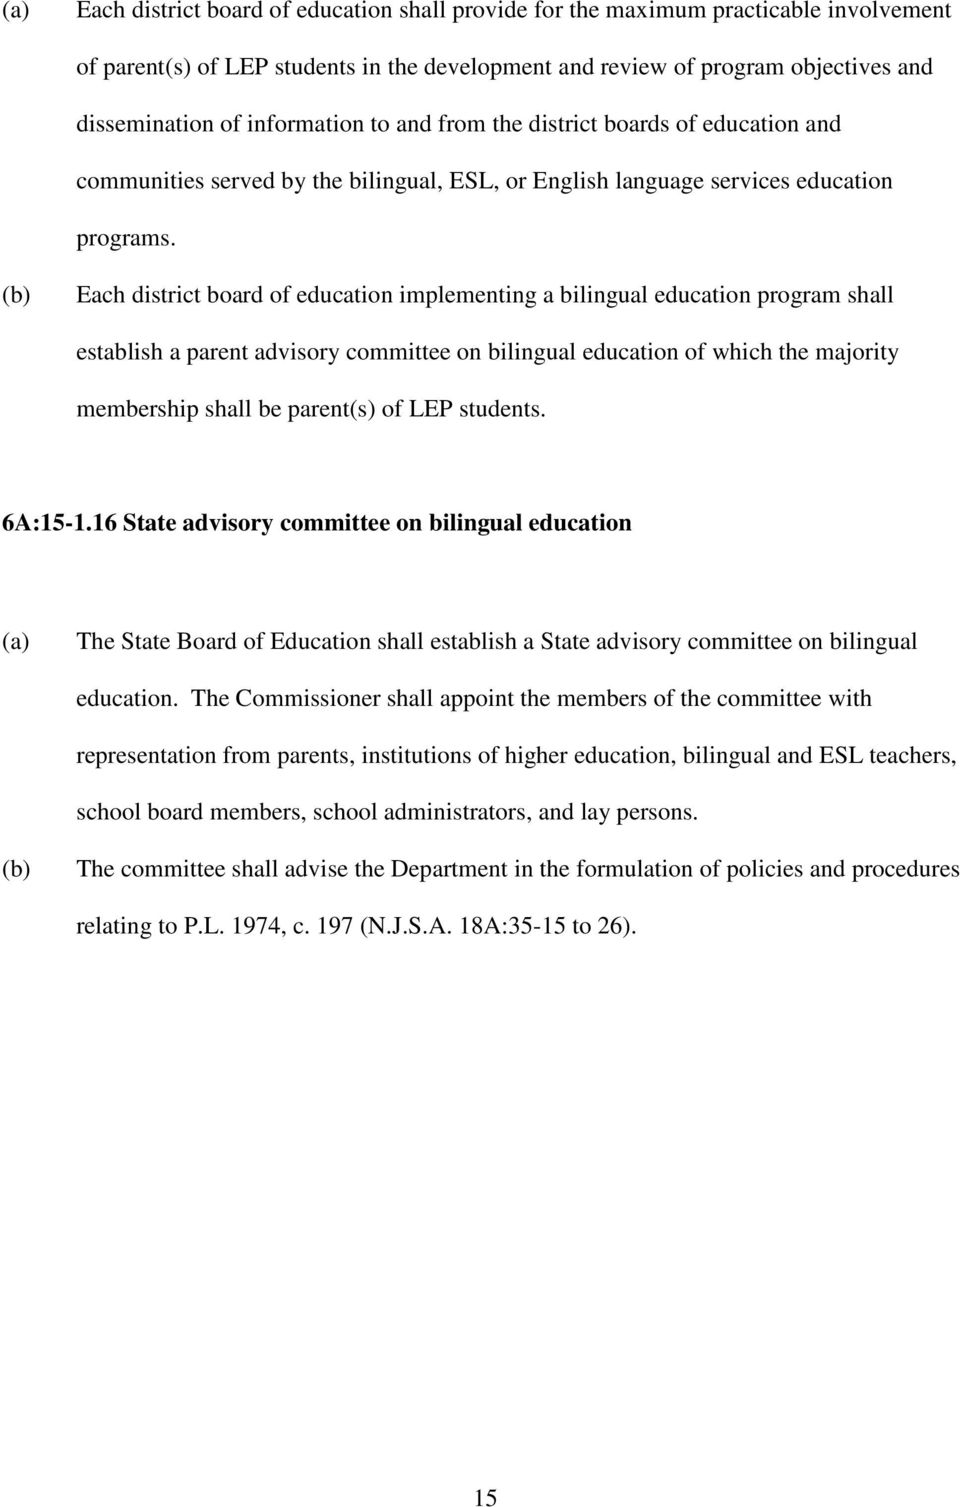 Each district board of education implementing a bilingual education program shall establish a parent advisory committee on bilingual education of which the majority membership shall be parent(s) of